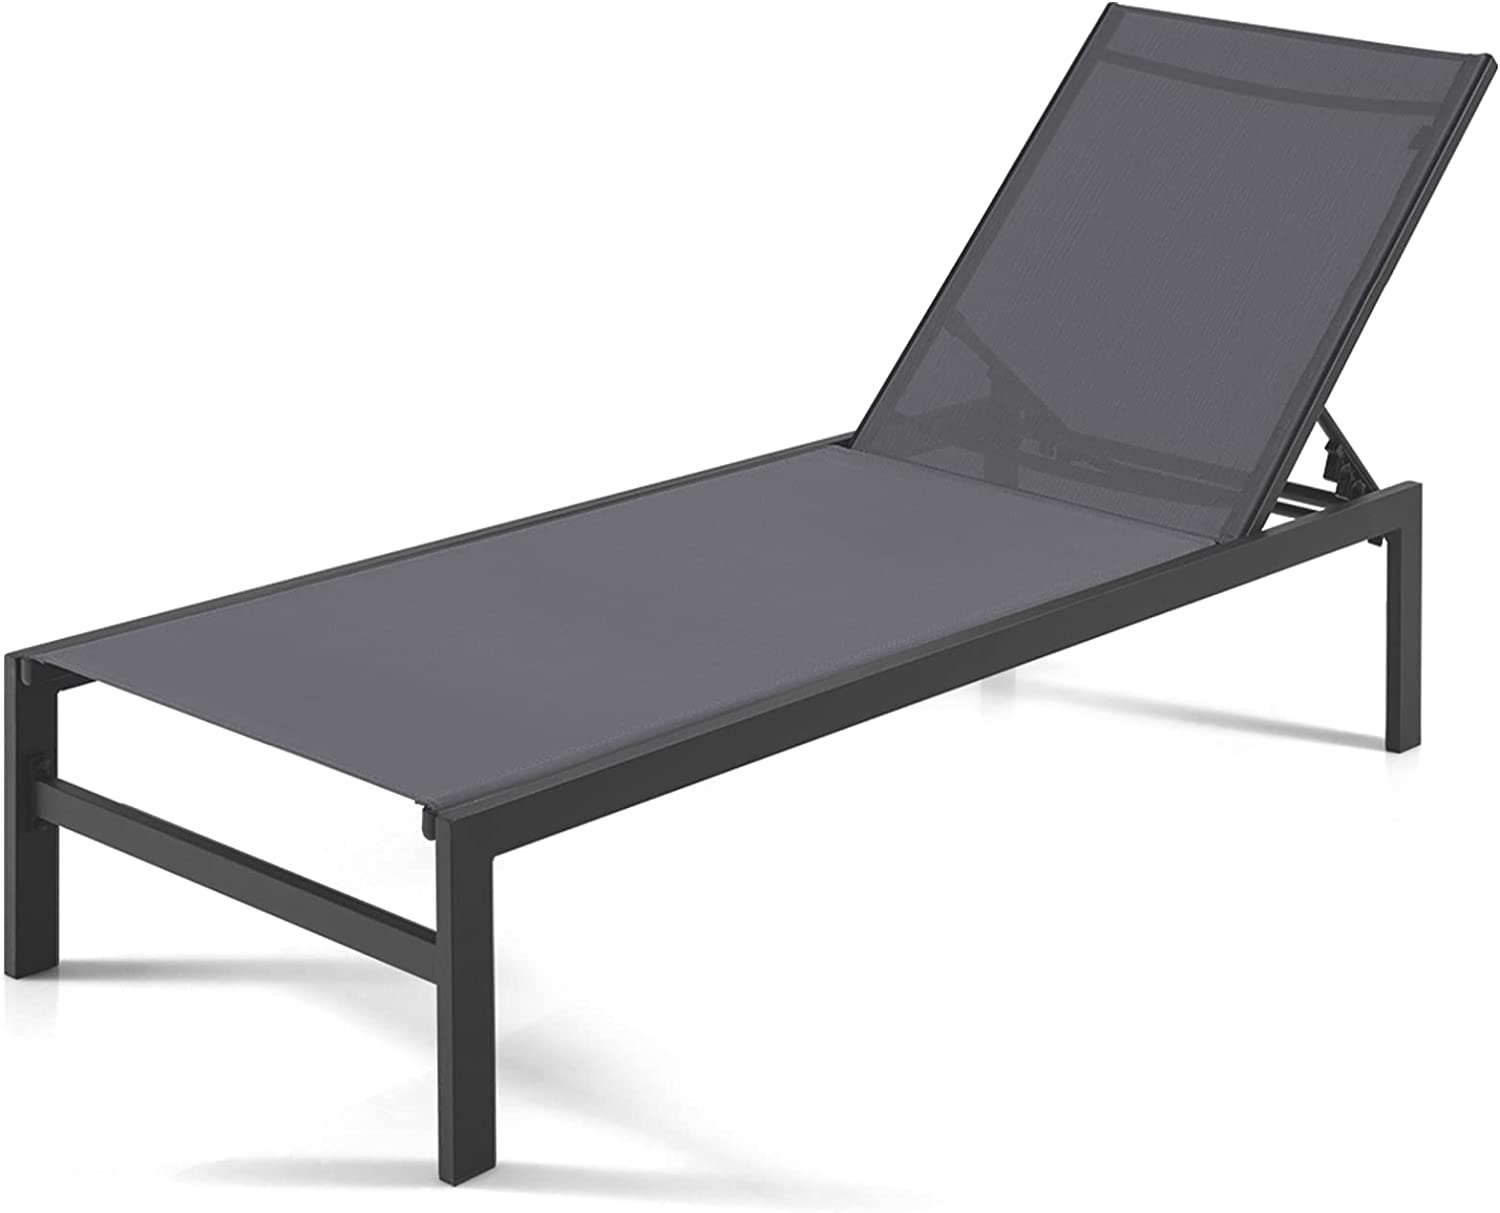 Giantex Patio Chaise Lounge Chair, Outdoor Sunbathing Chair Lawn Reclining Lounger with 6 Adjustable Position